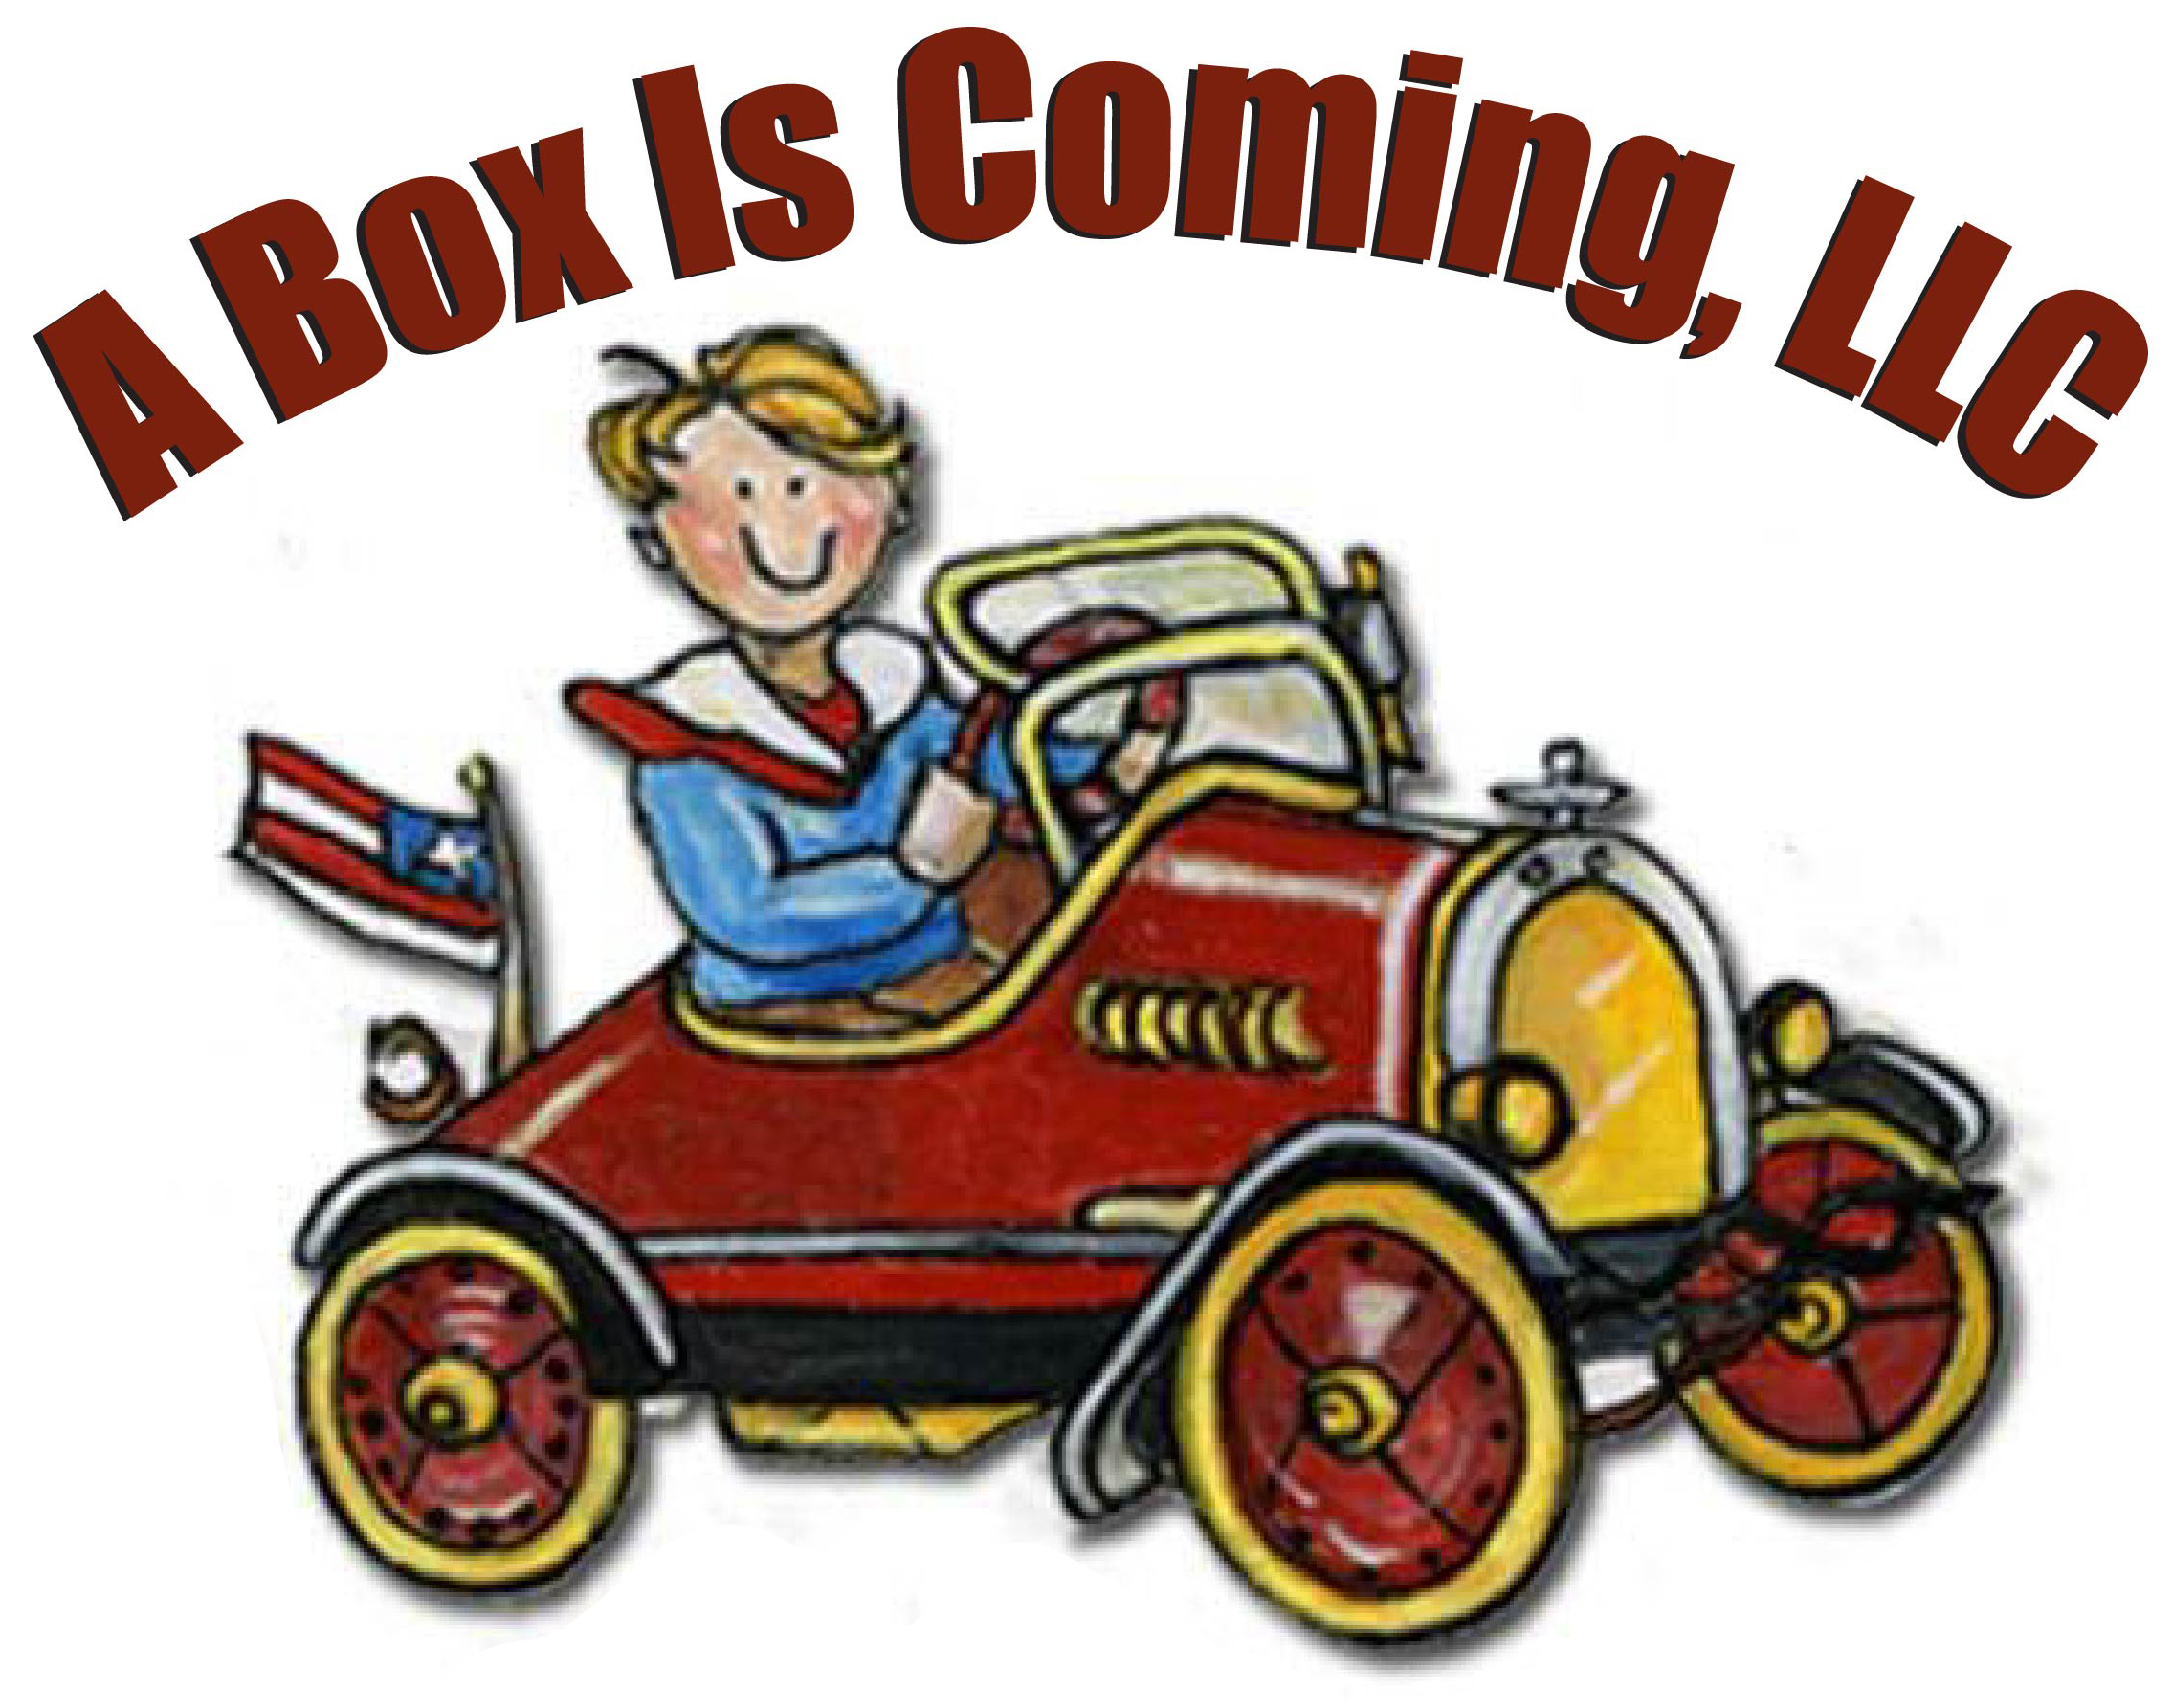 A Box Is Coming Logo